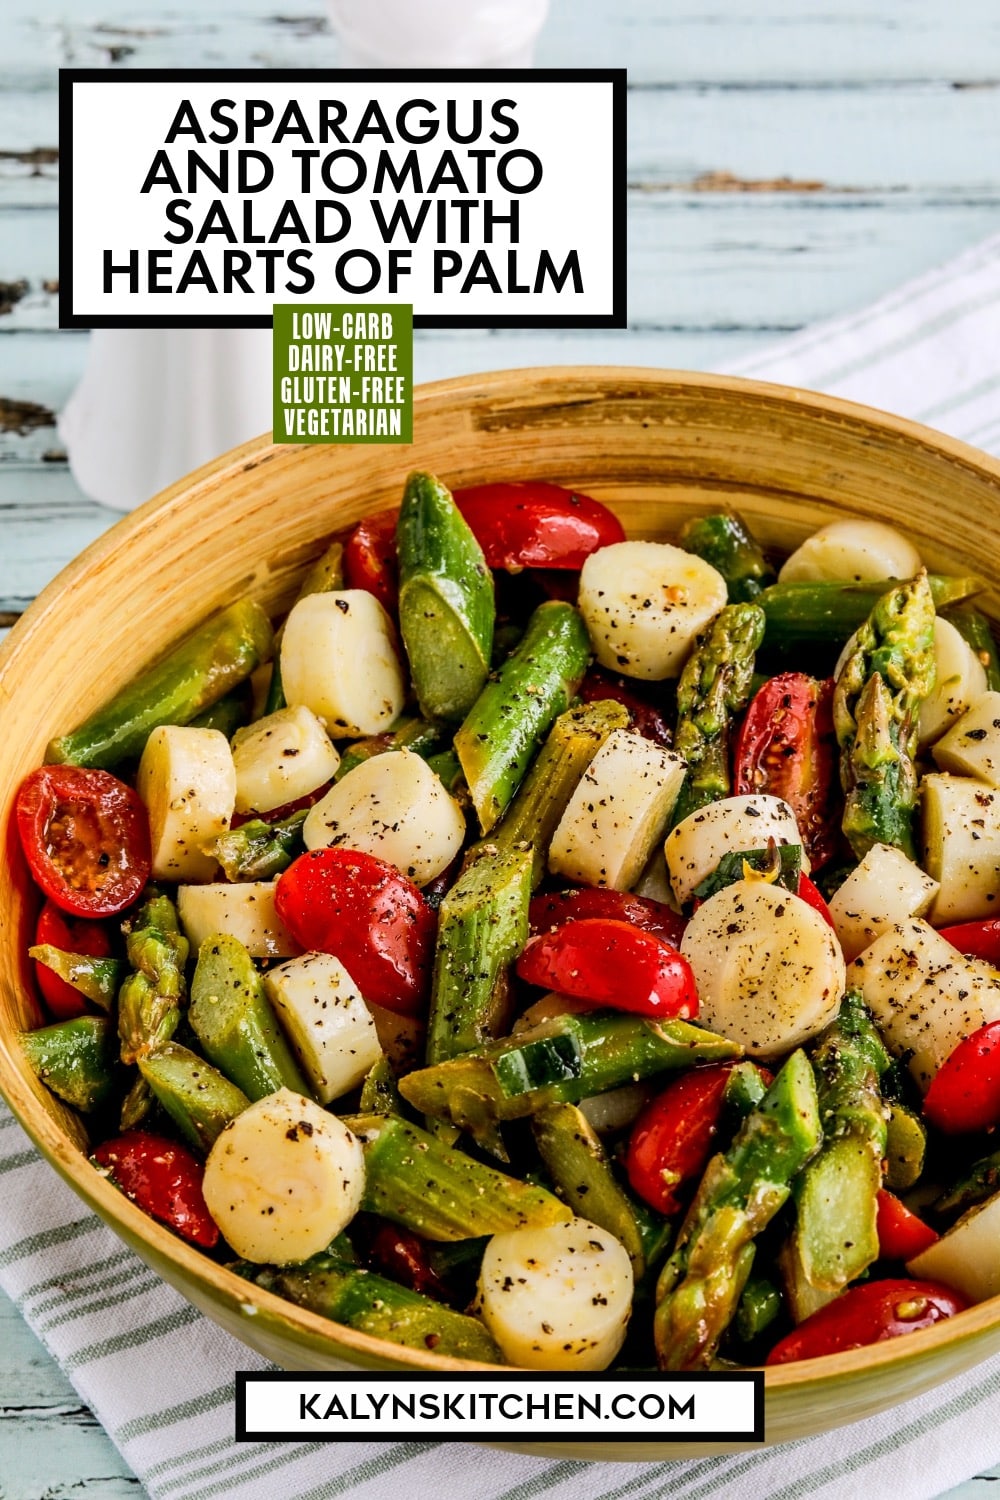 Pinterest image of Asparagus and Tomato Salad with Hearts of Palm